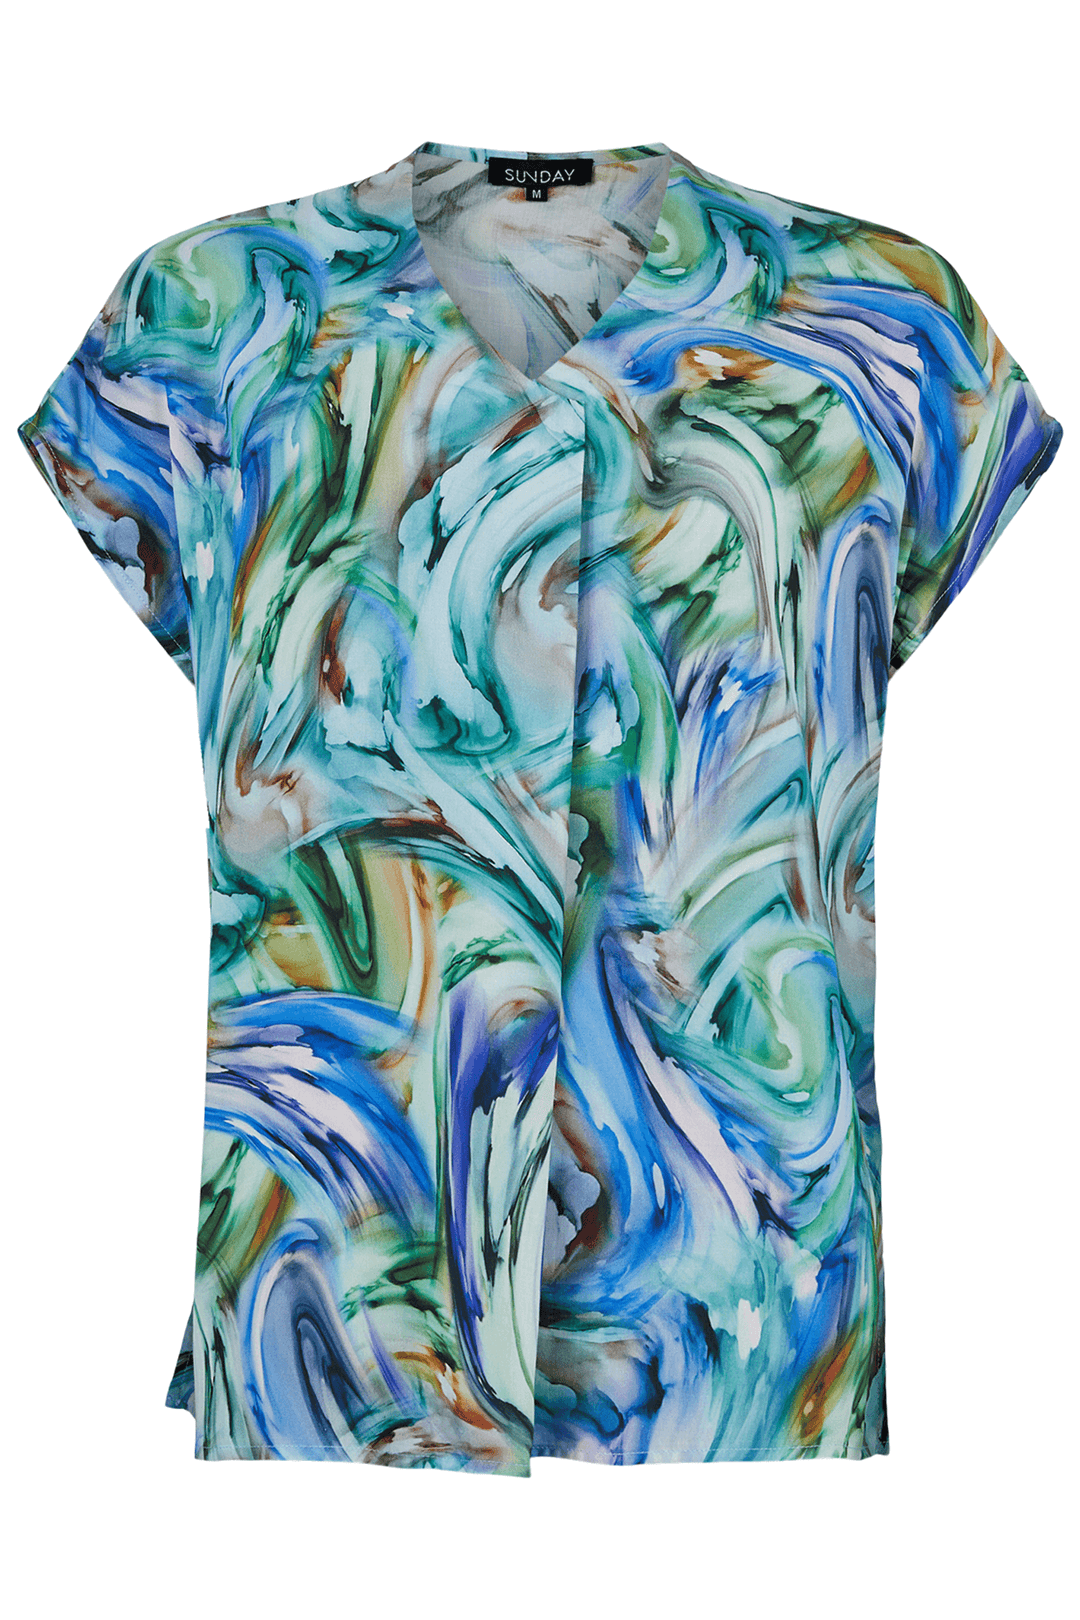 Sunday 6664 Blue Watercolour Marbled Top